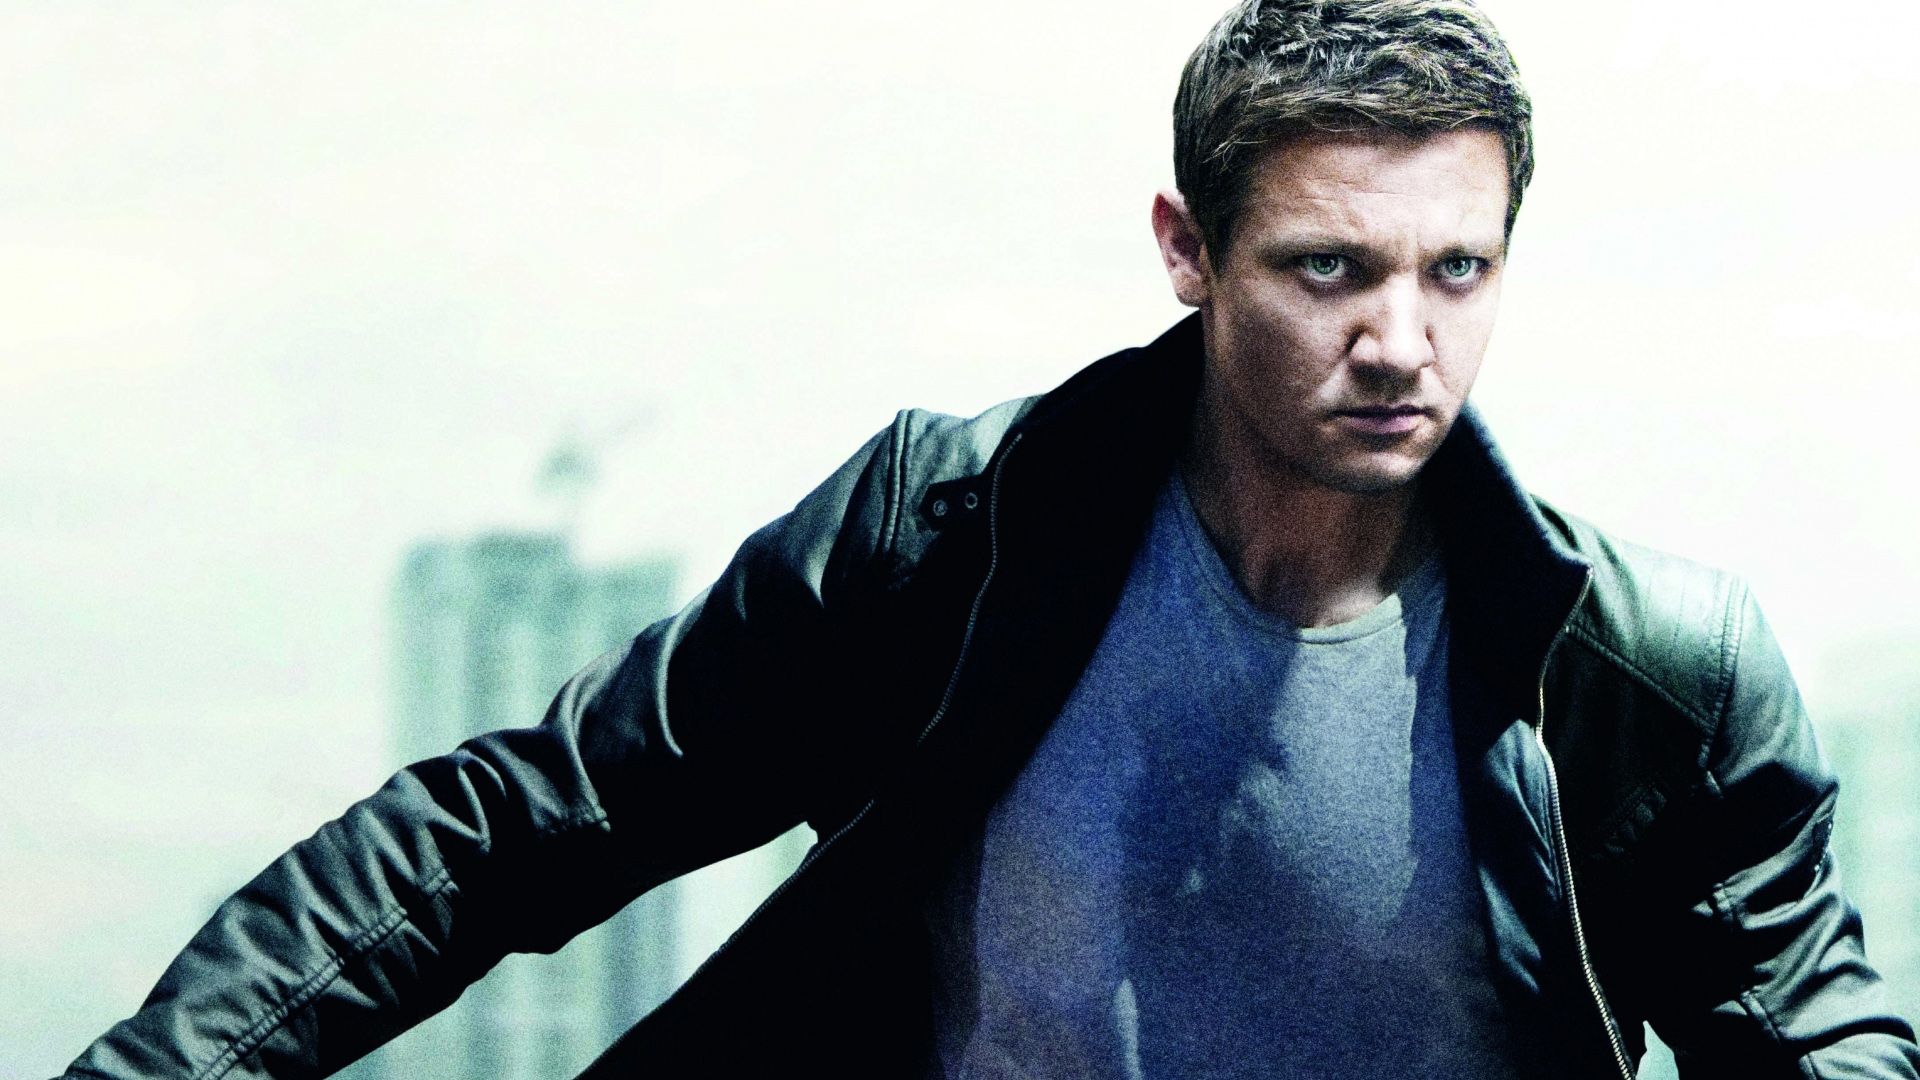 Jeremy Renner Actor Wallpaper 66261 1920x1080px